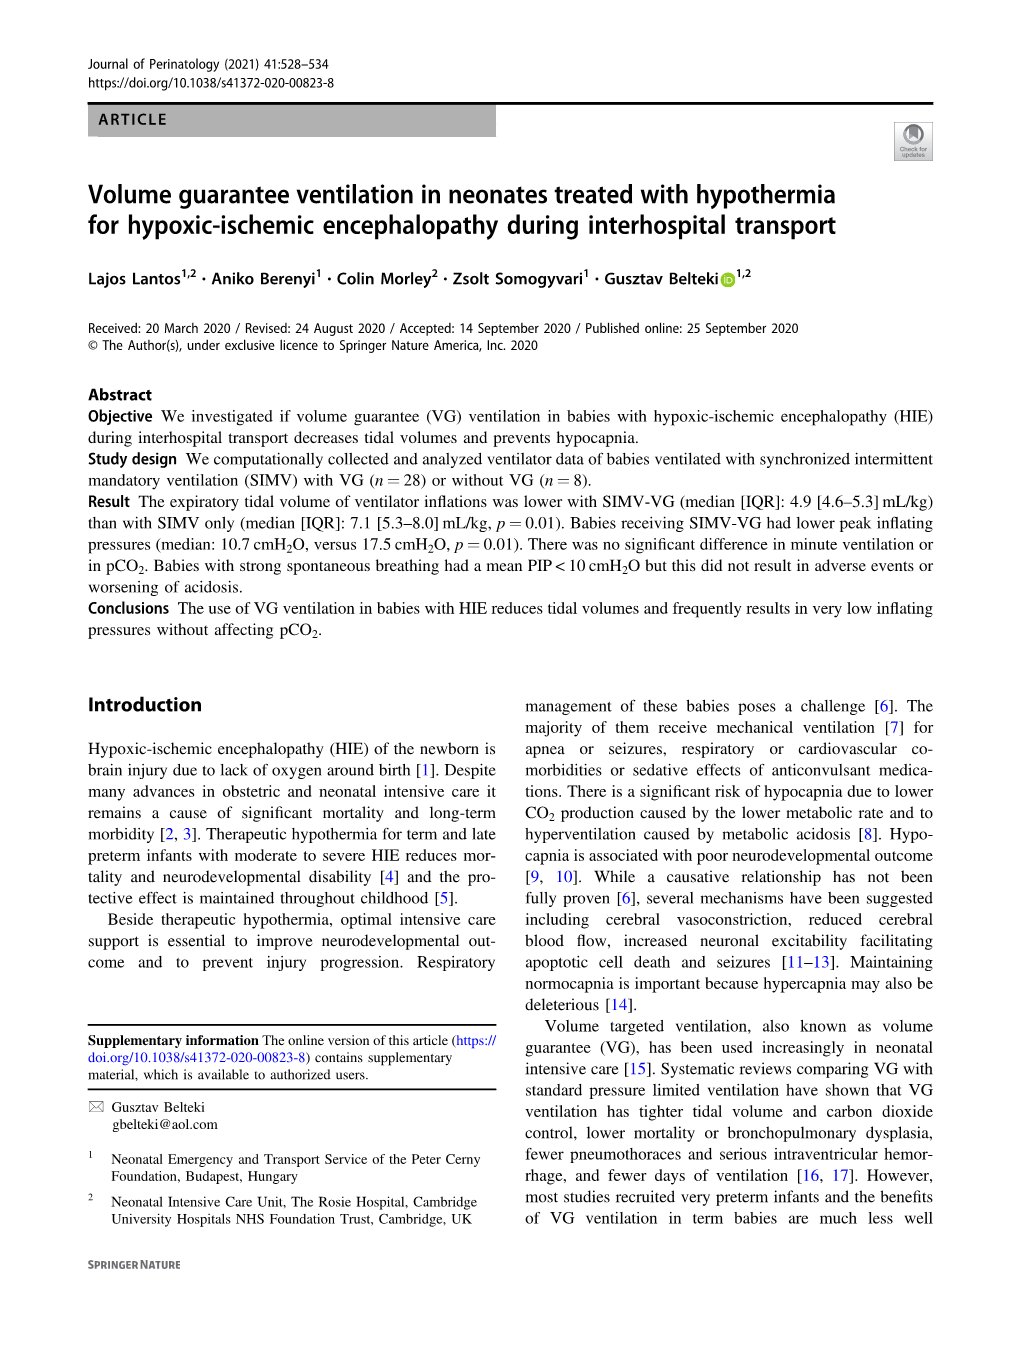 Volume Guarantee Ventilation in Neonates Treated with Hypothermia for Hypoxic-Ischemic Encephalopathy During Interhospital Transport